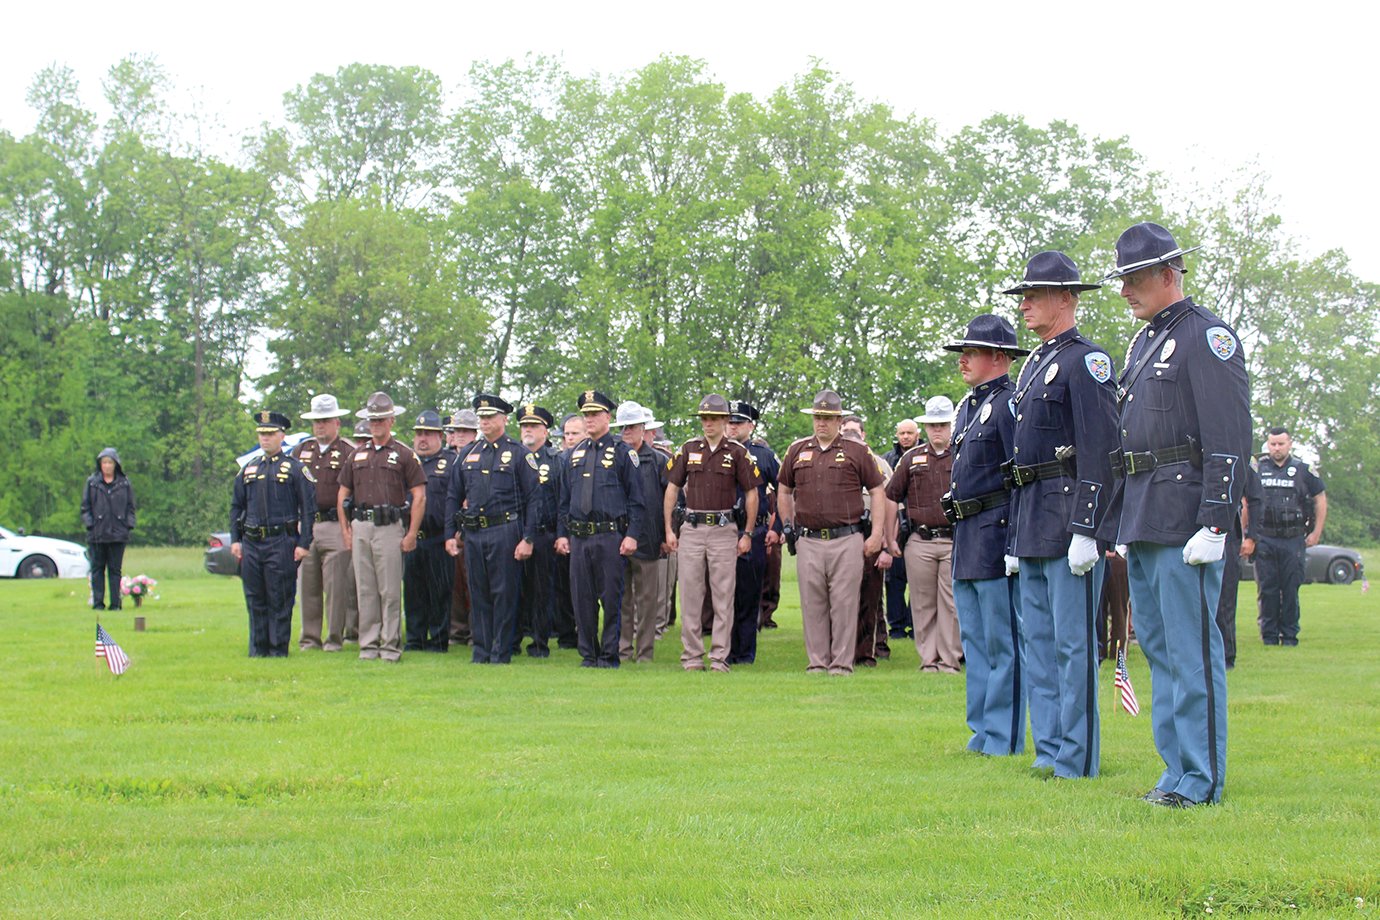 Officers honor the life and service of Lt. Russell Baldwin at Oak Hill Cemetery.